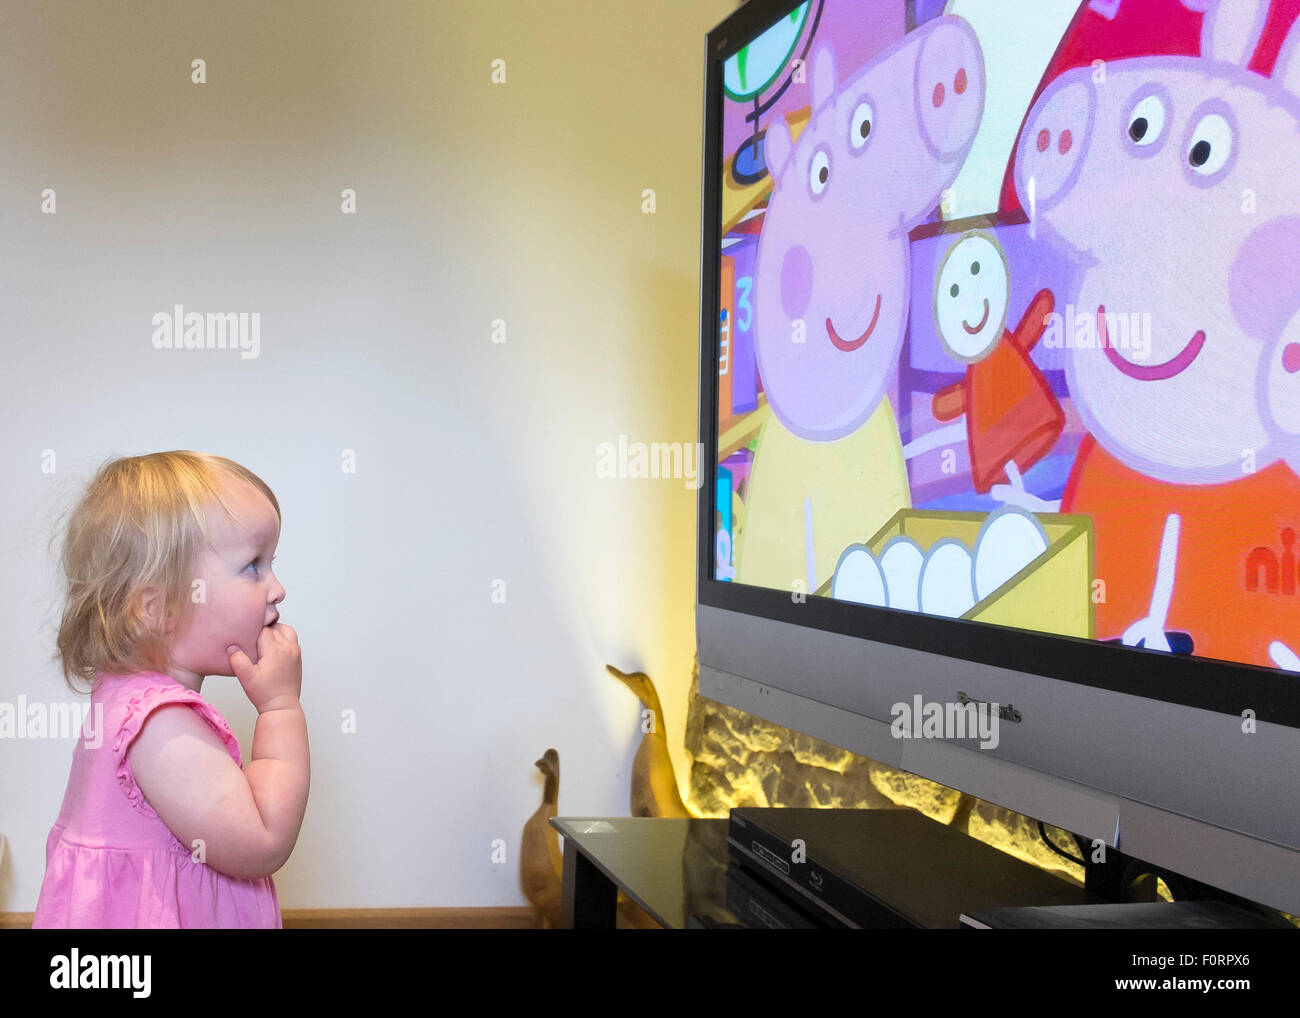 A toddler watches childrens television. Stock Photo